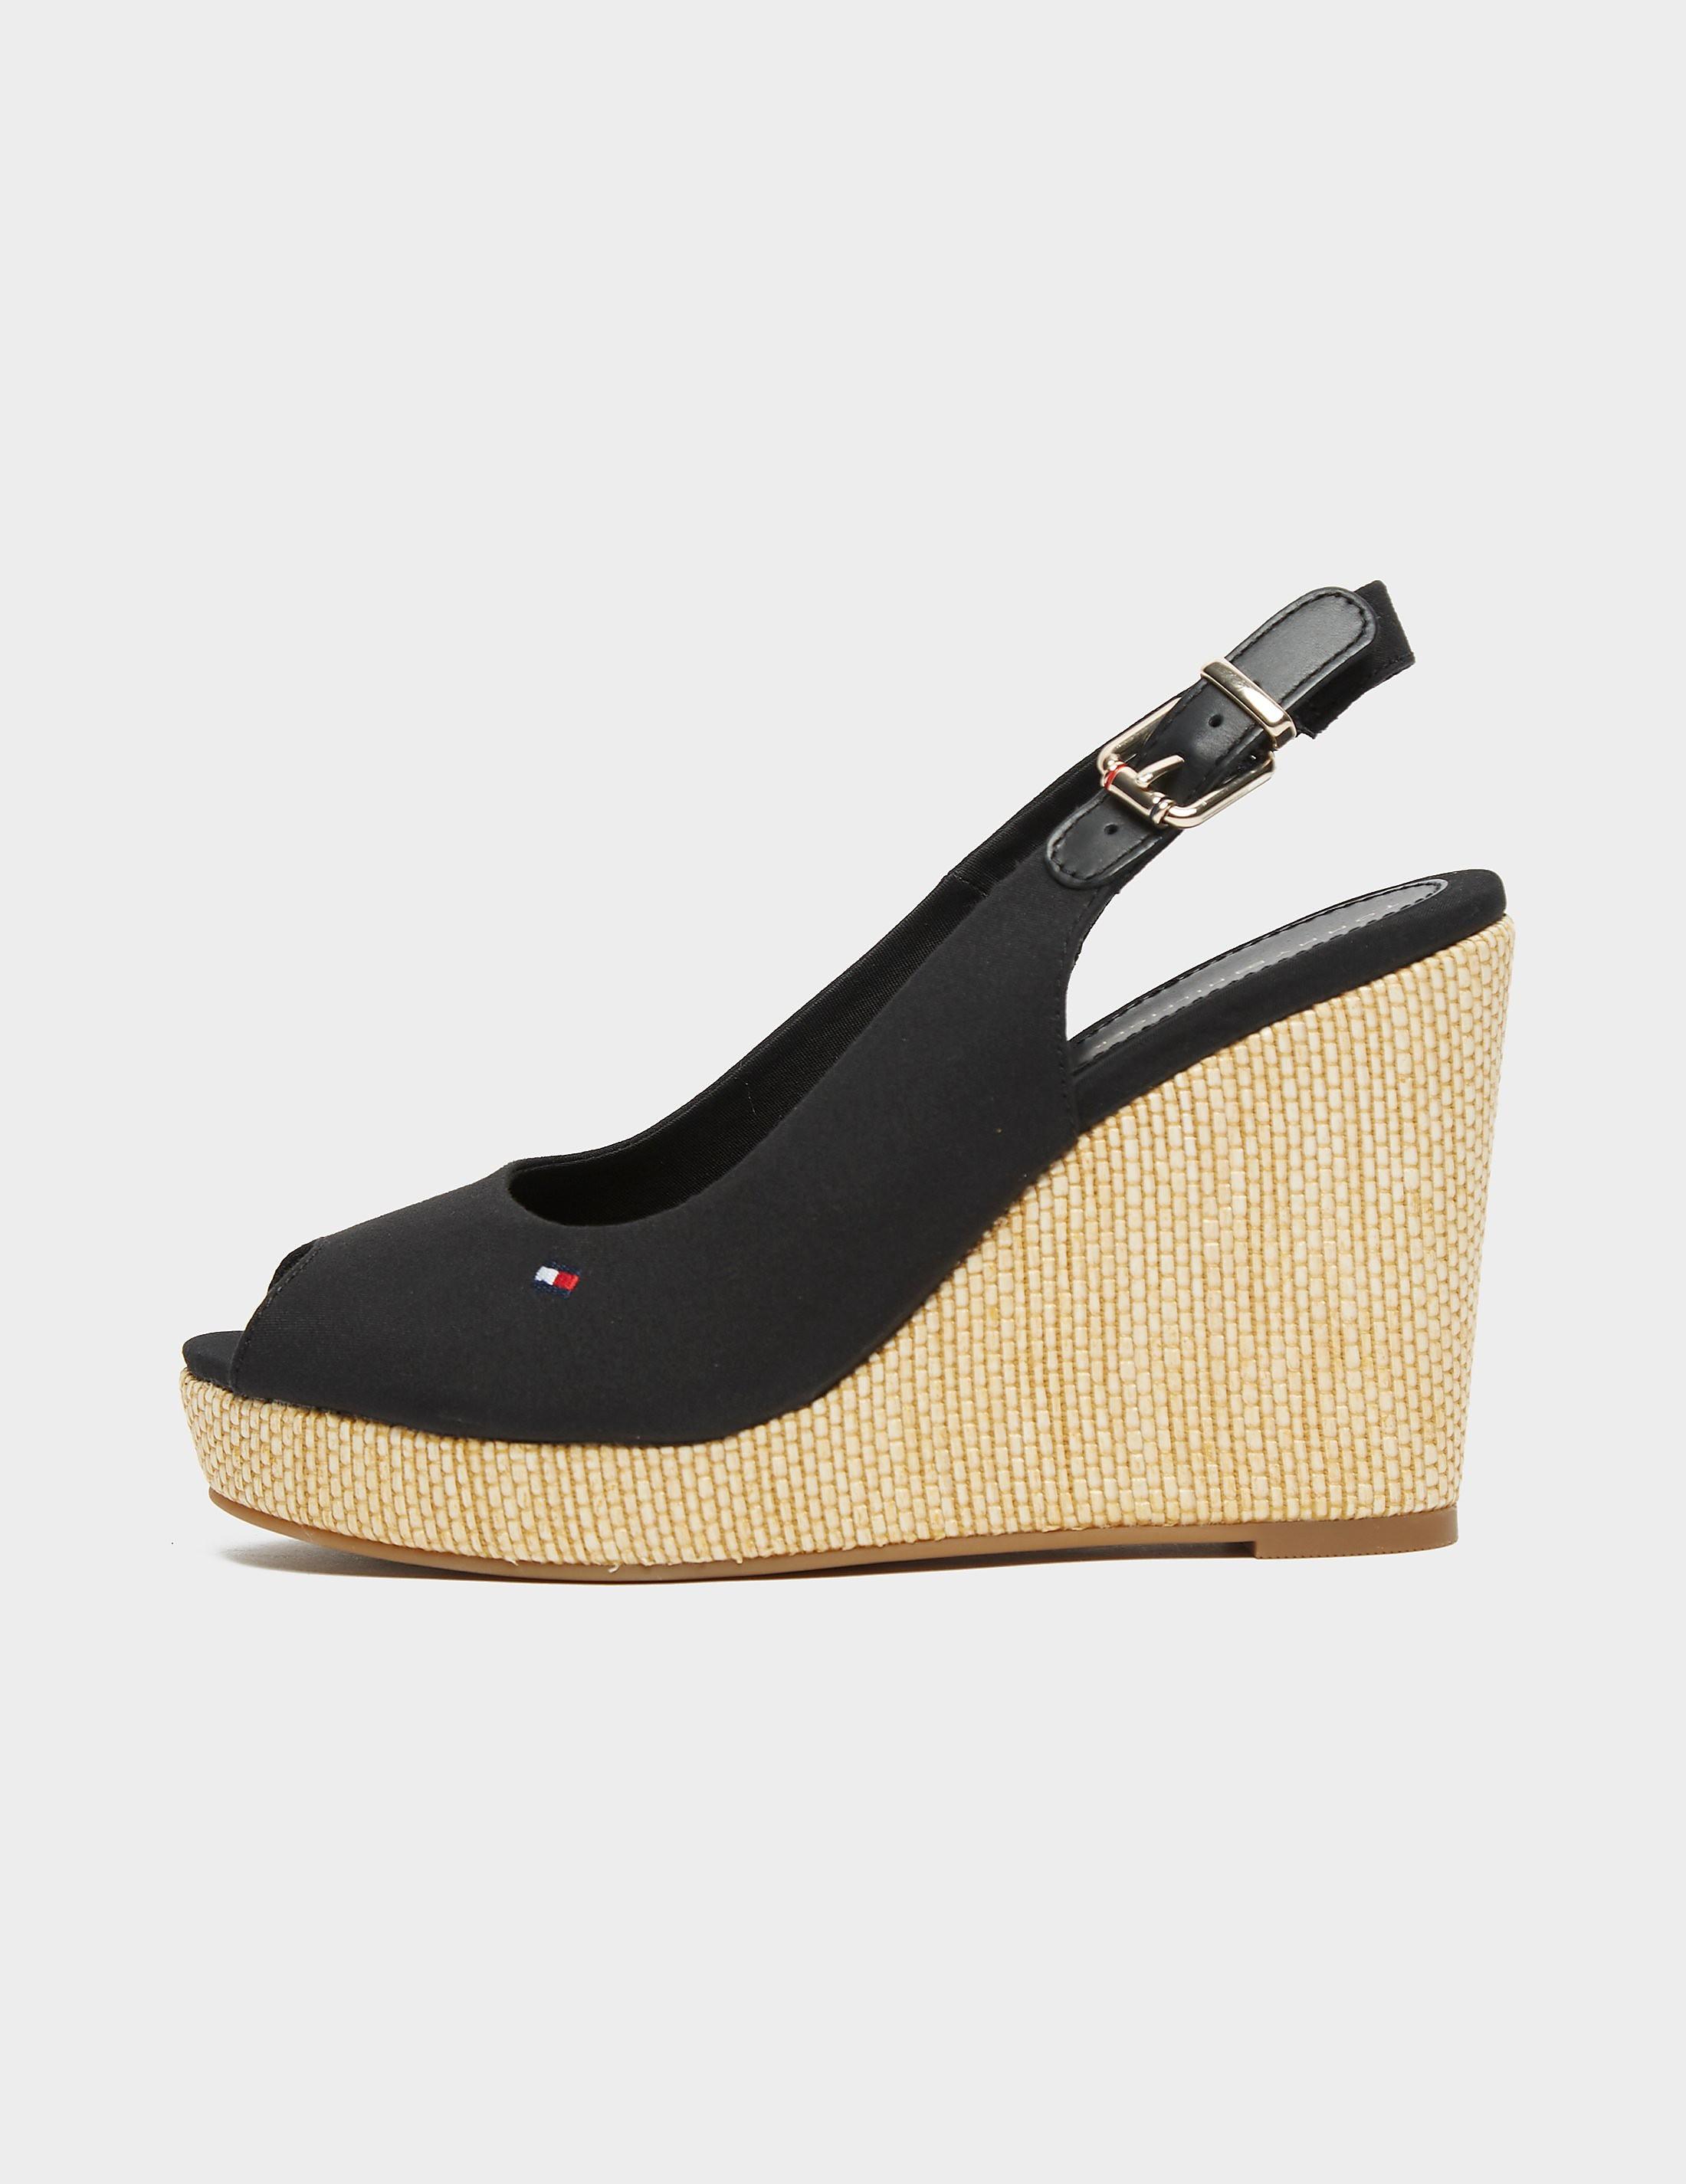 Tommy Hilfiger Synthetic Icon Elena Wedge Sandals in Black - Lyst